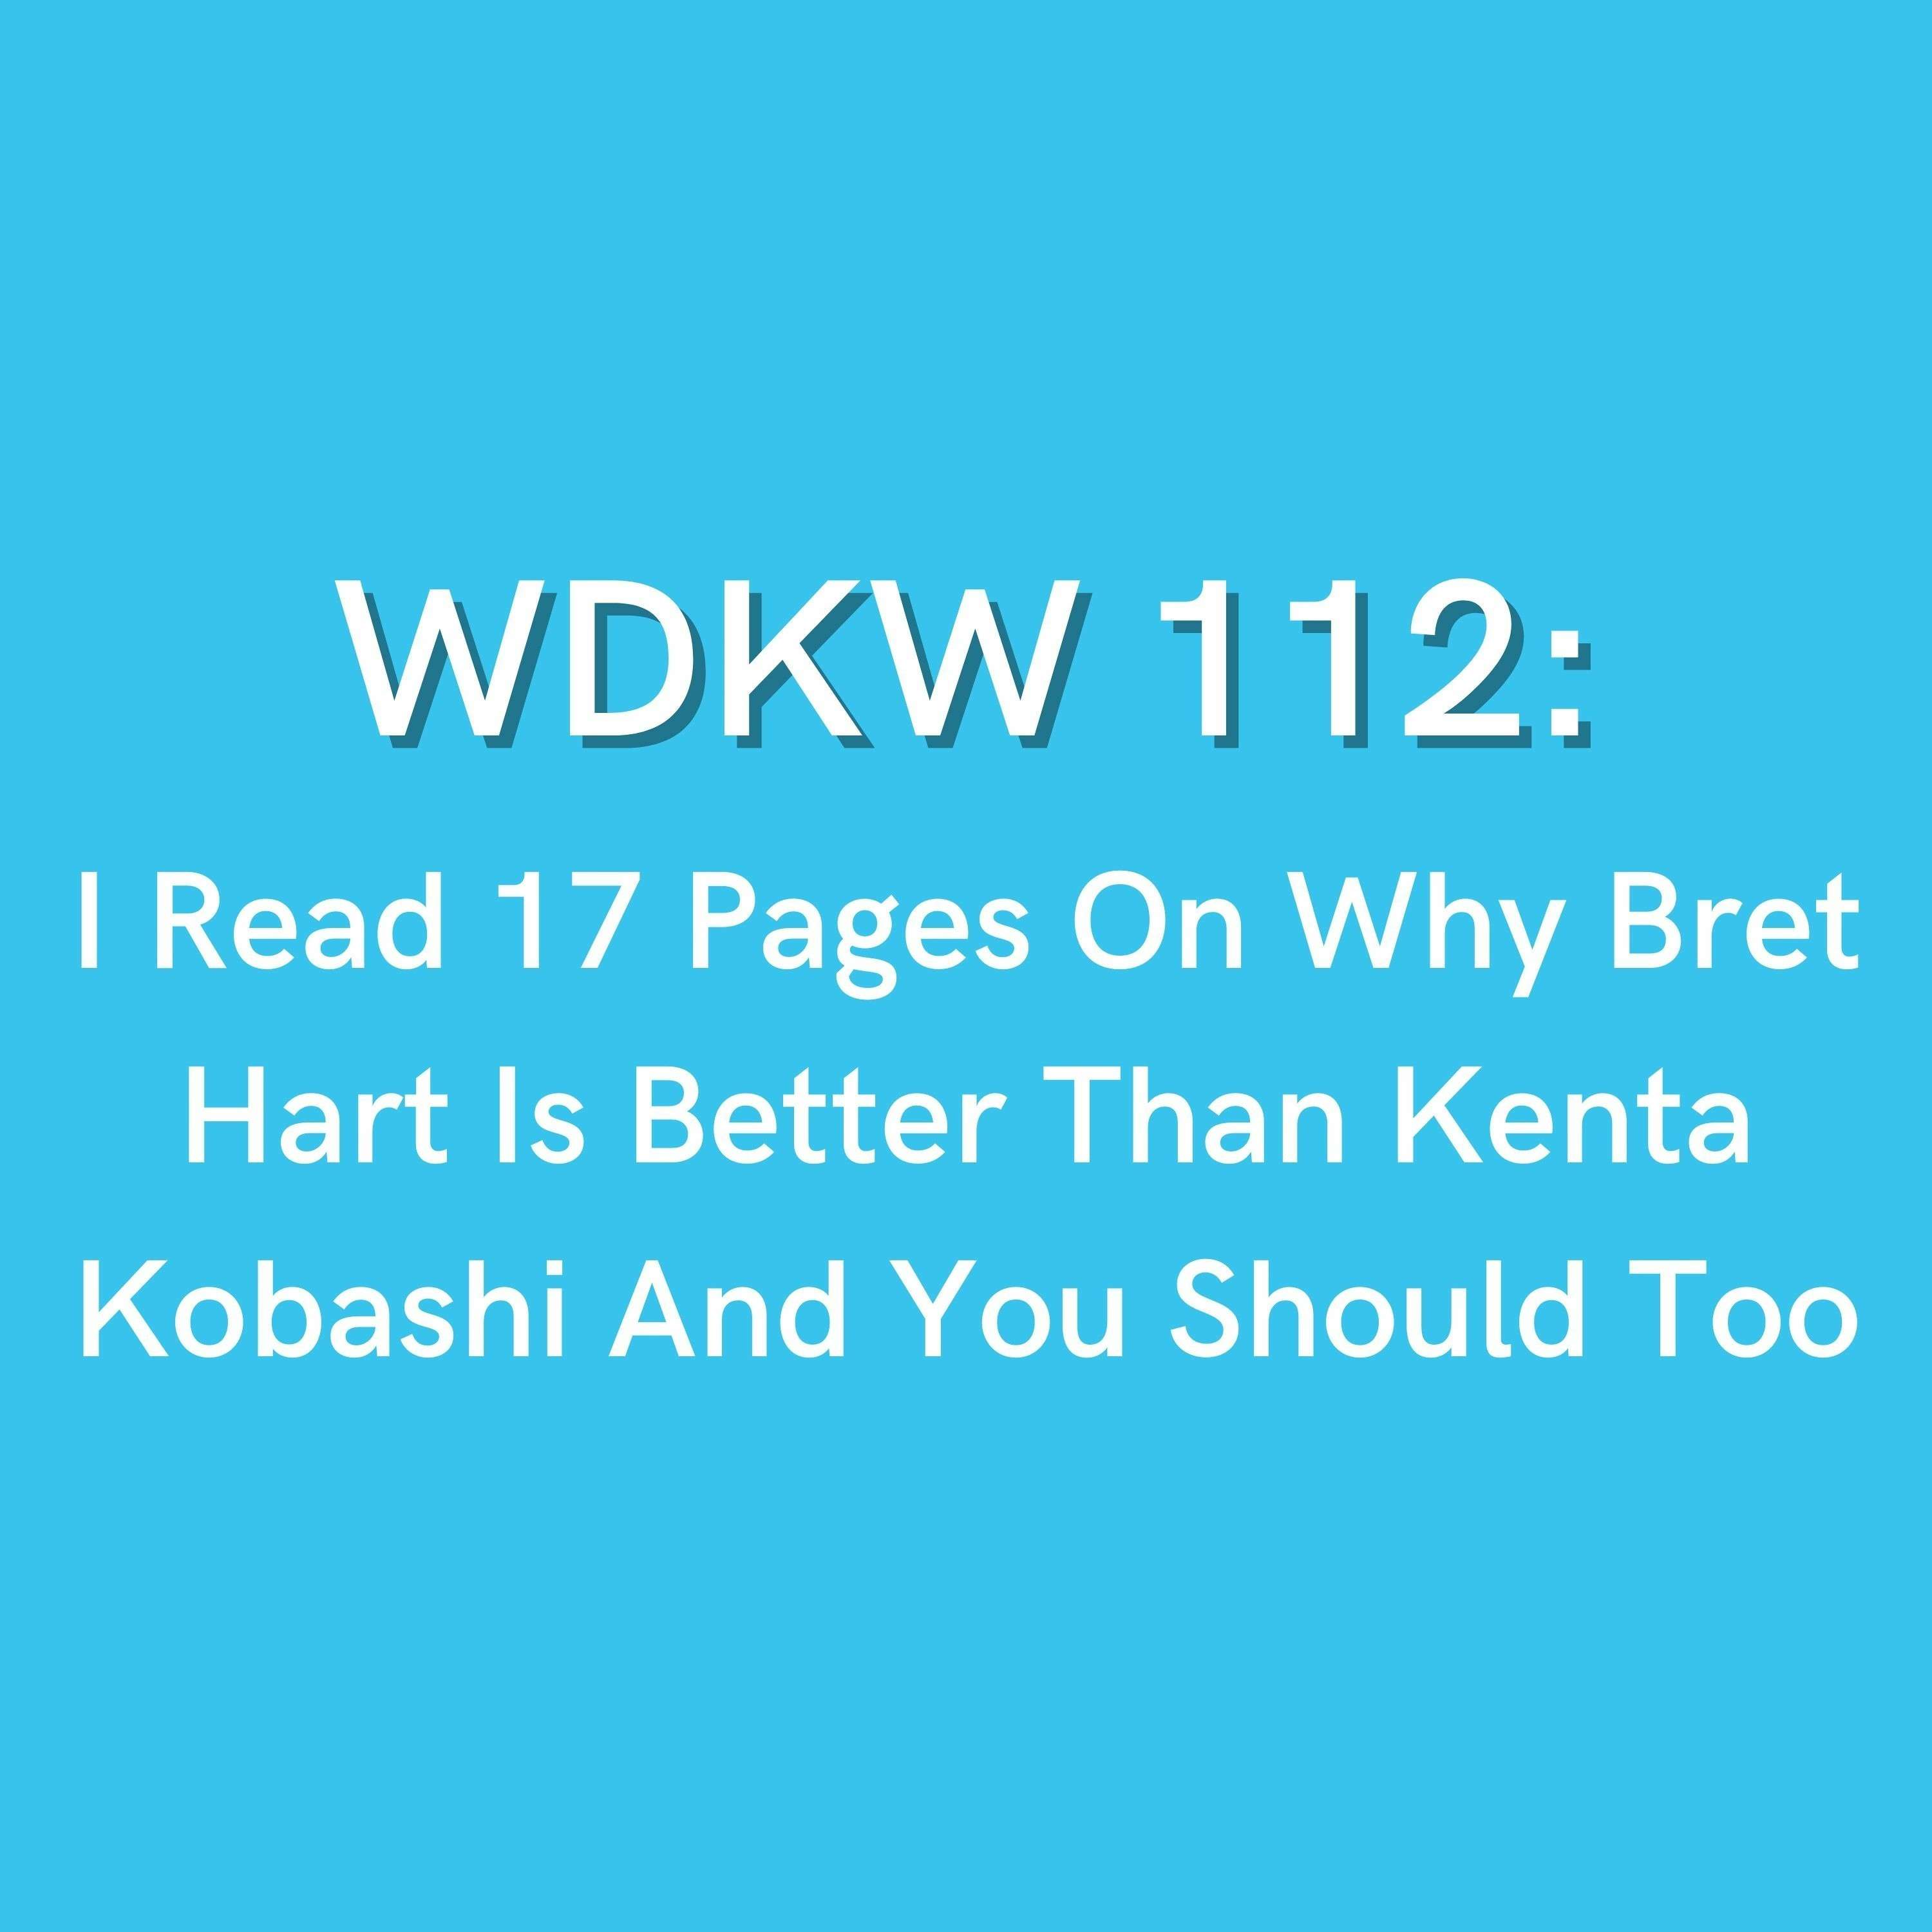 WDKW 112: I Read 17 Pages On Why Bret Hart Is Better Than Kenta Kobashi And You Should Too